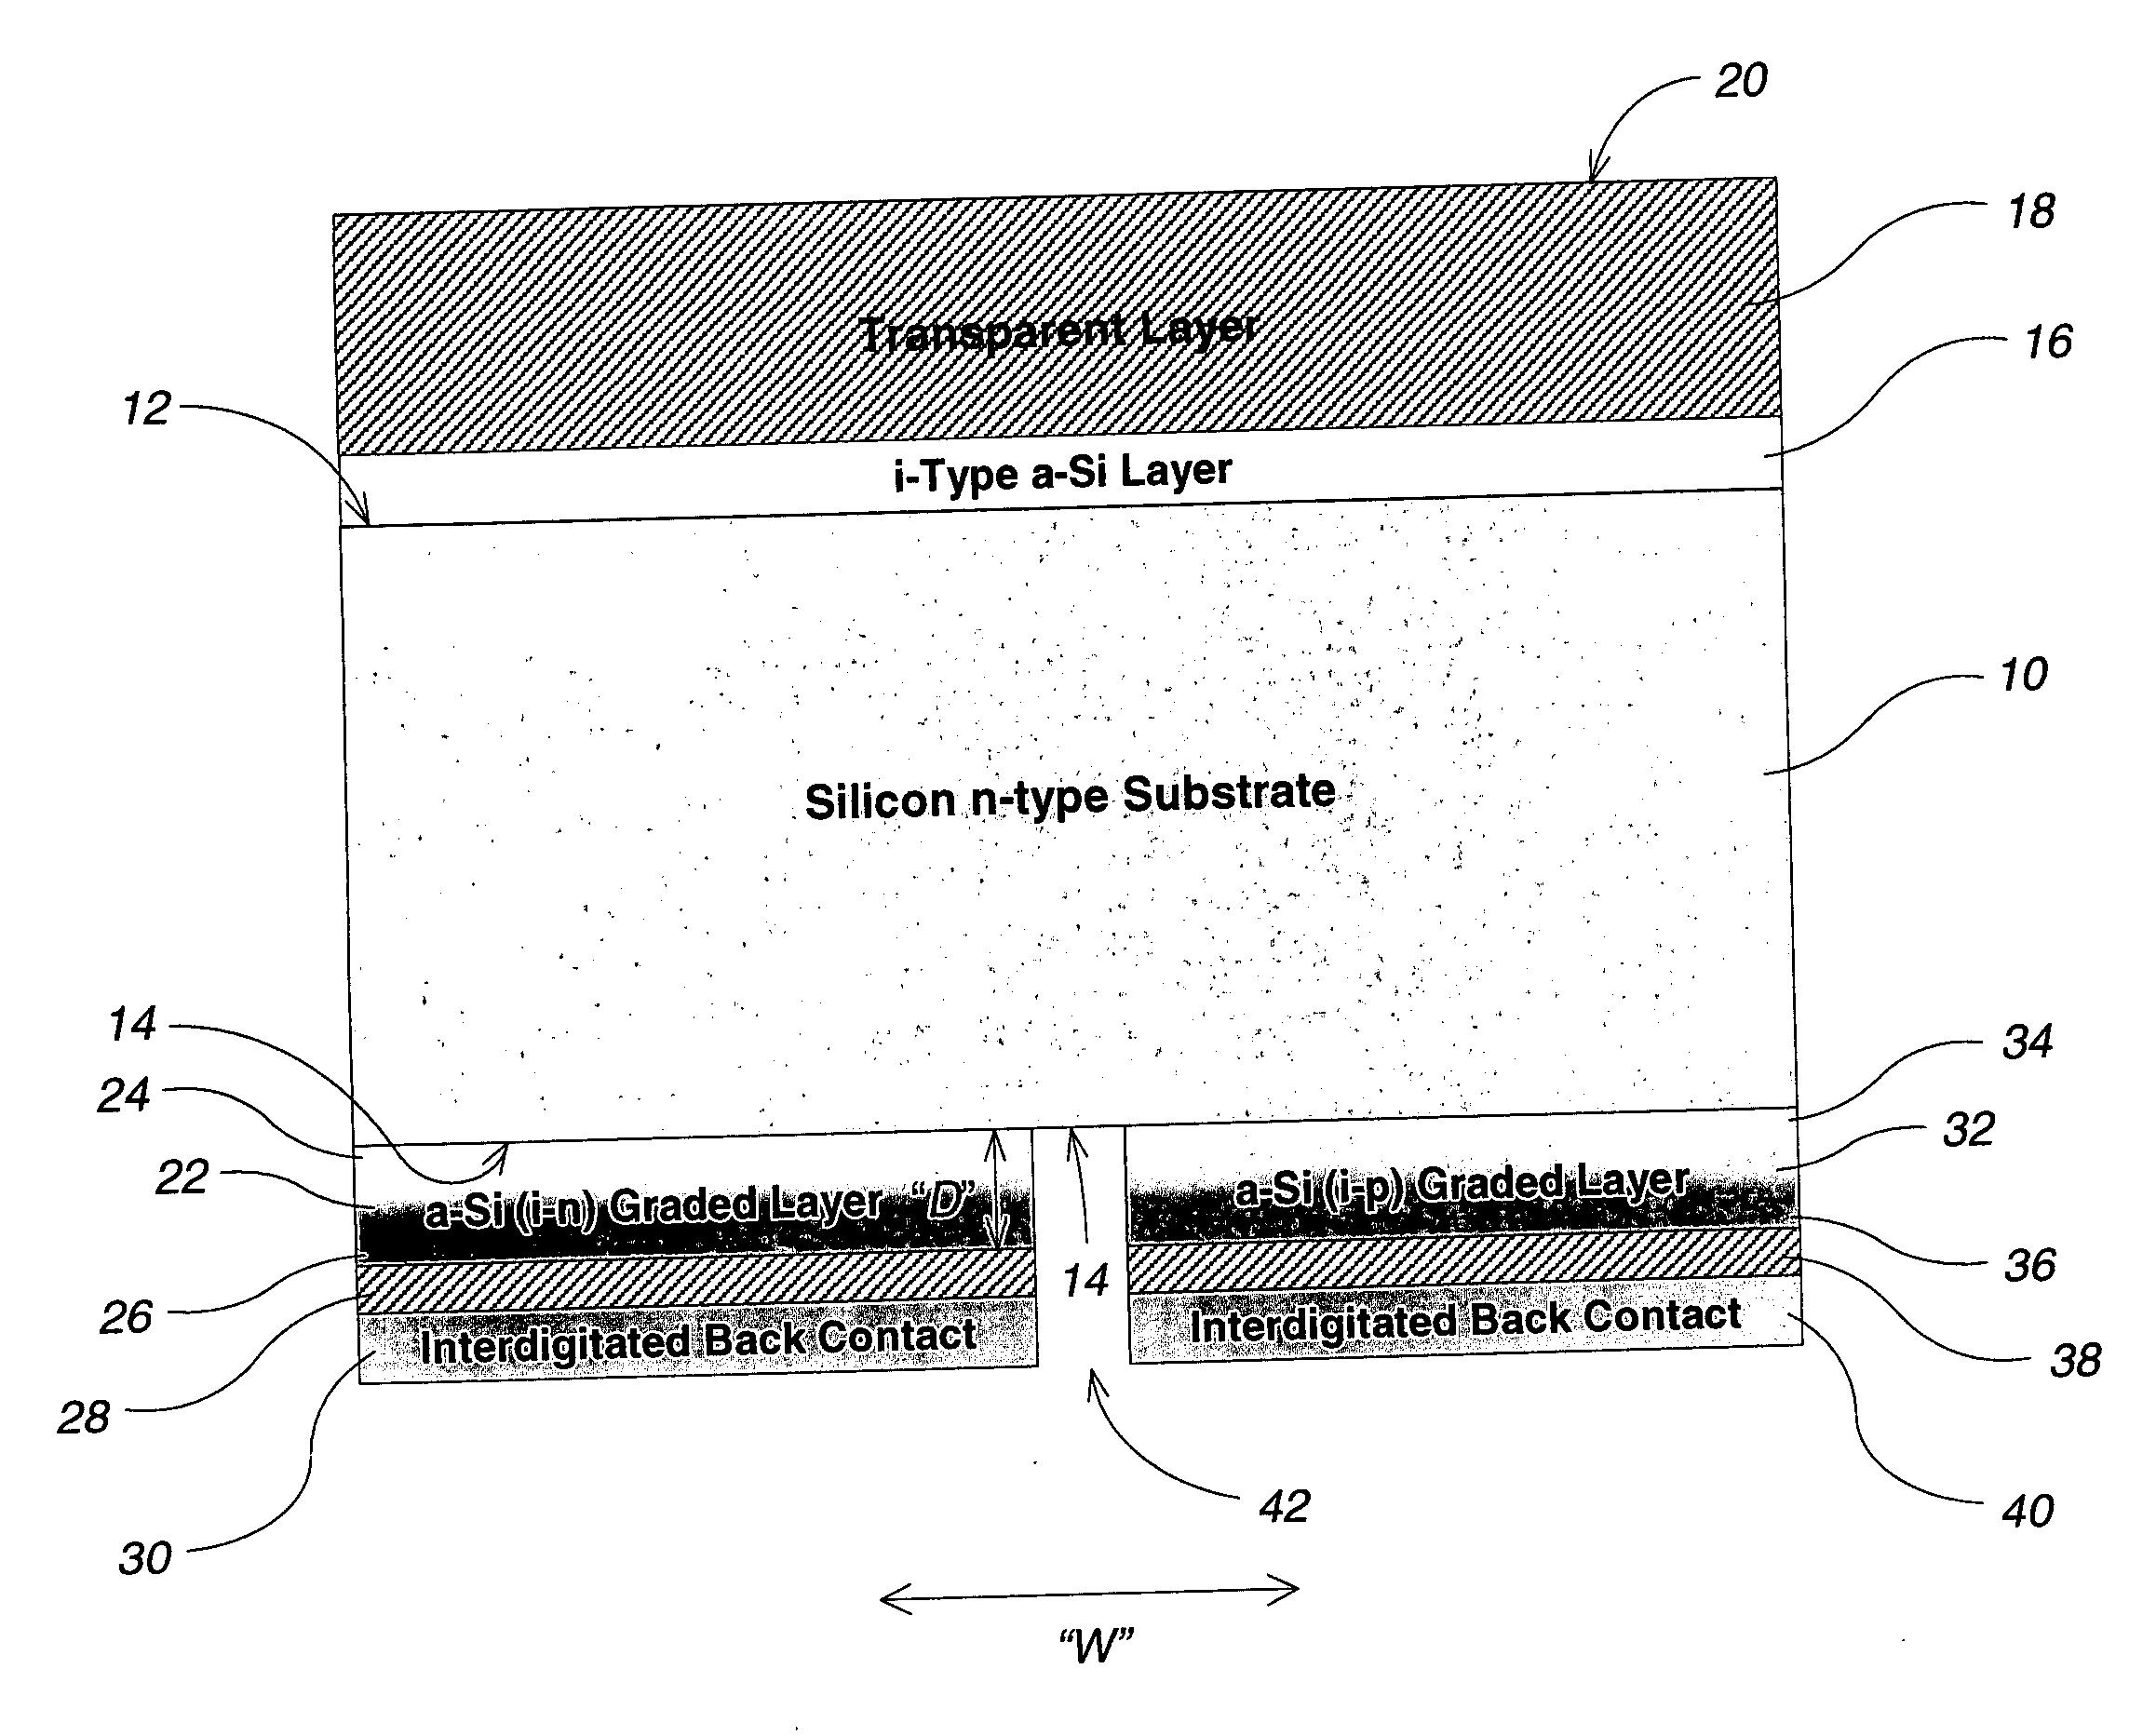 Photovoltaic device which includes all-back-contact configuration; and related processes